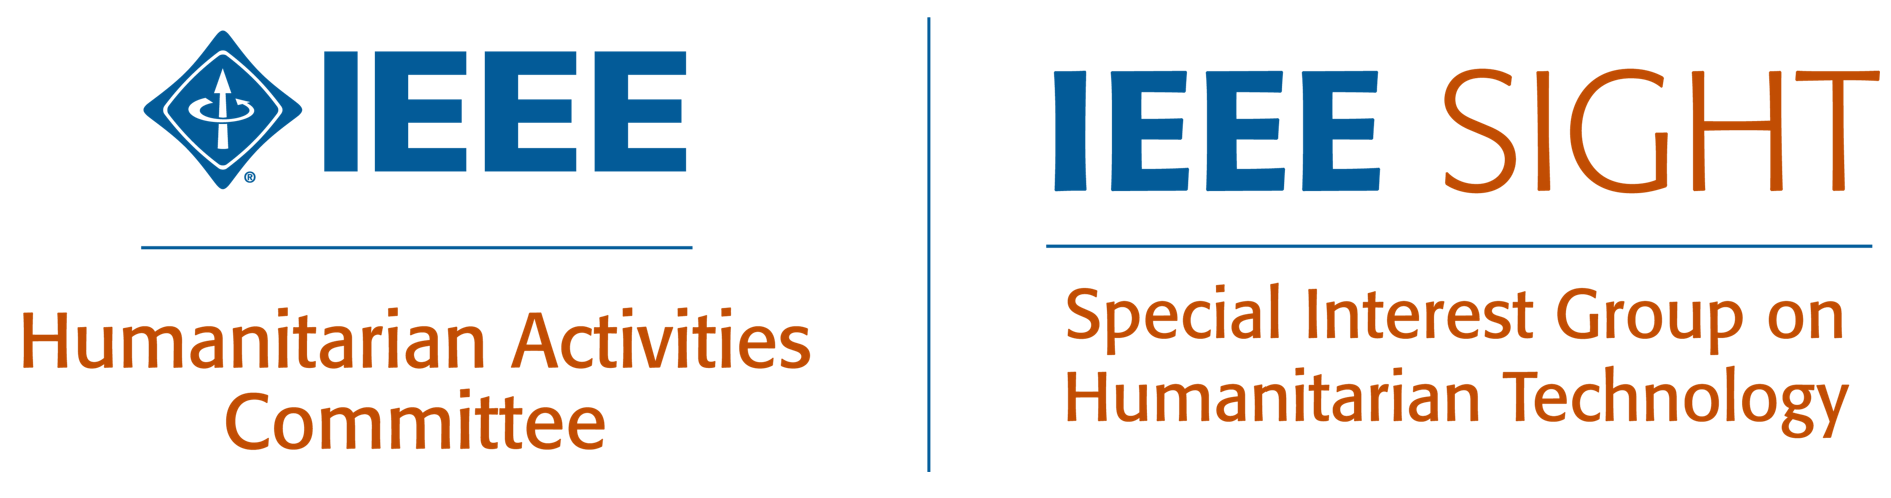 IEEE HAC and SIGHT